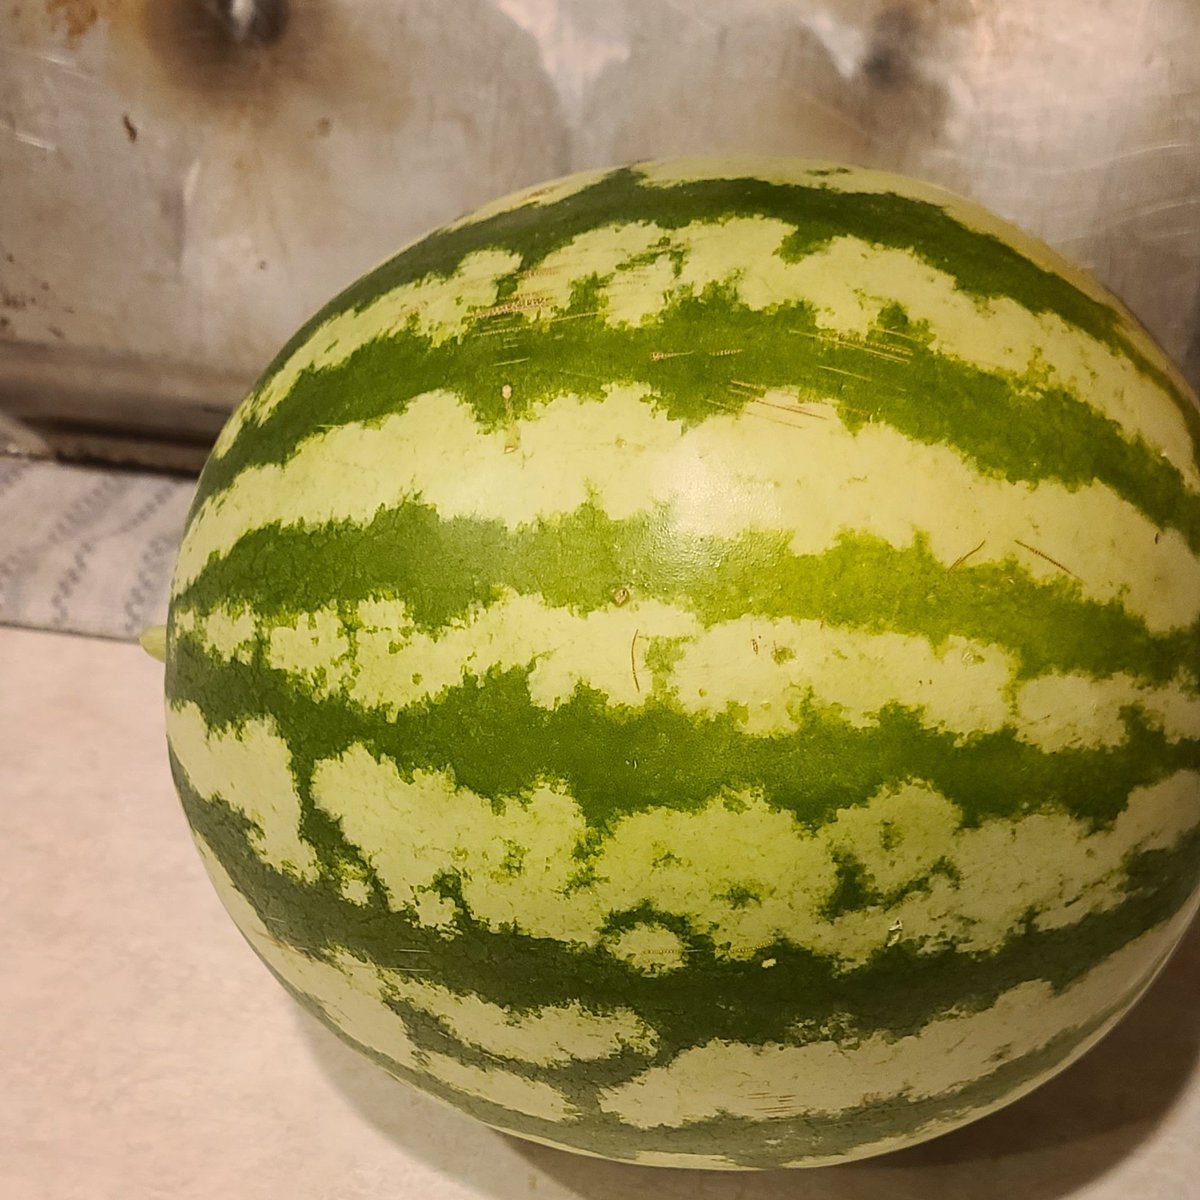 So after dealing with issues with the other watermelons splitting, we went ahead and harvested this one there was a spot that feeling a little soft. Not rotten, but enough to make me want to pull it. we'll see if I pulled it too early! #WatermelonLove #homestead #growyourown